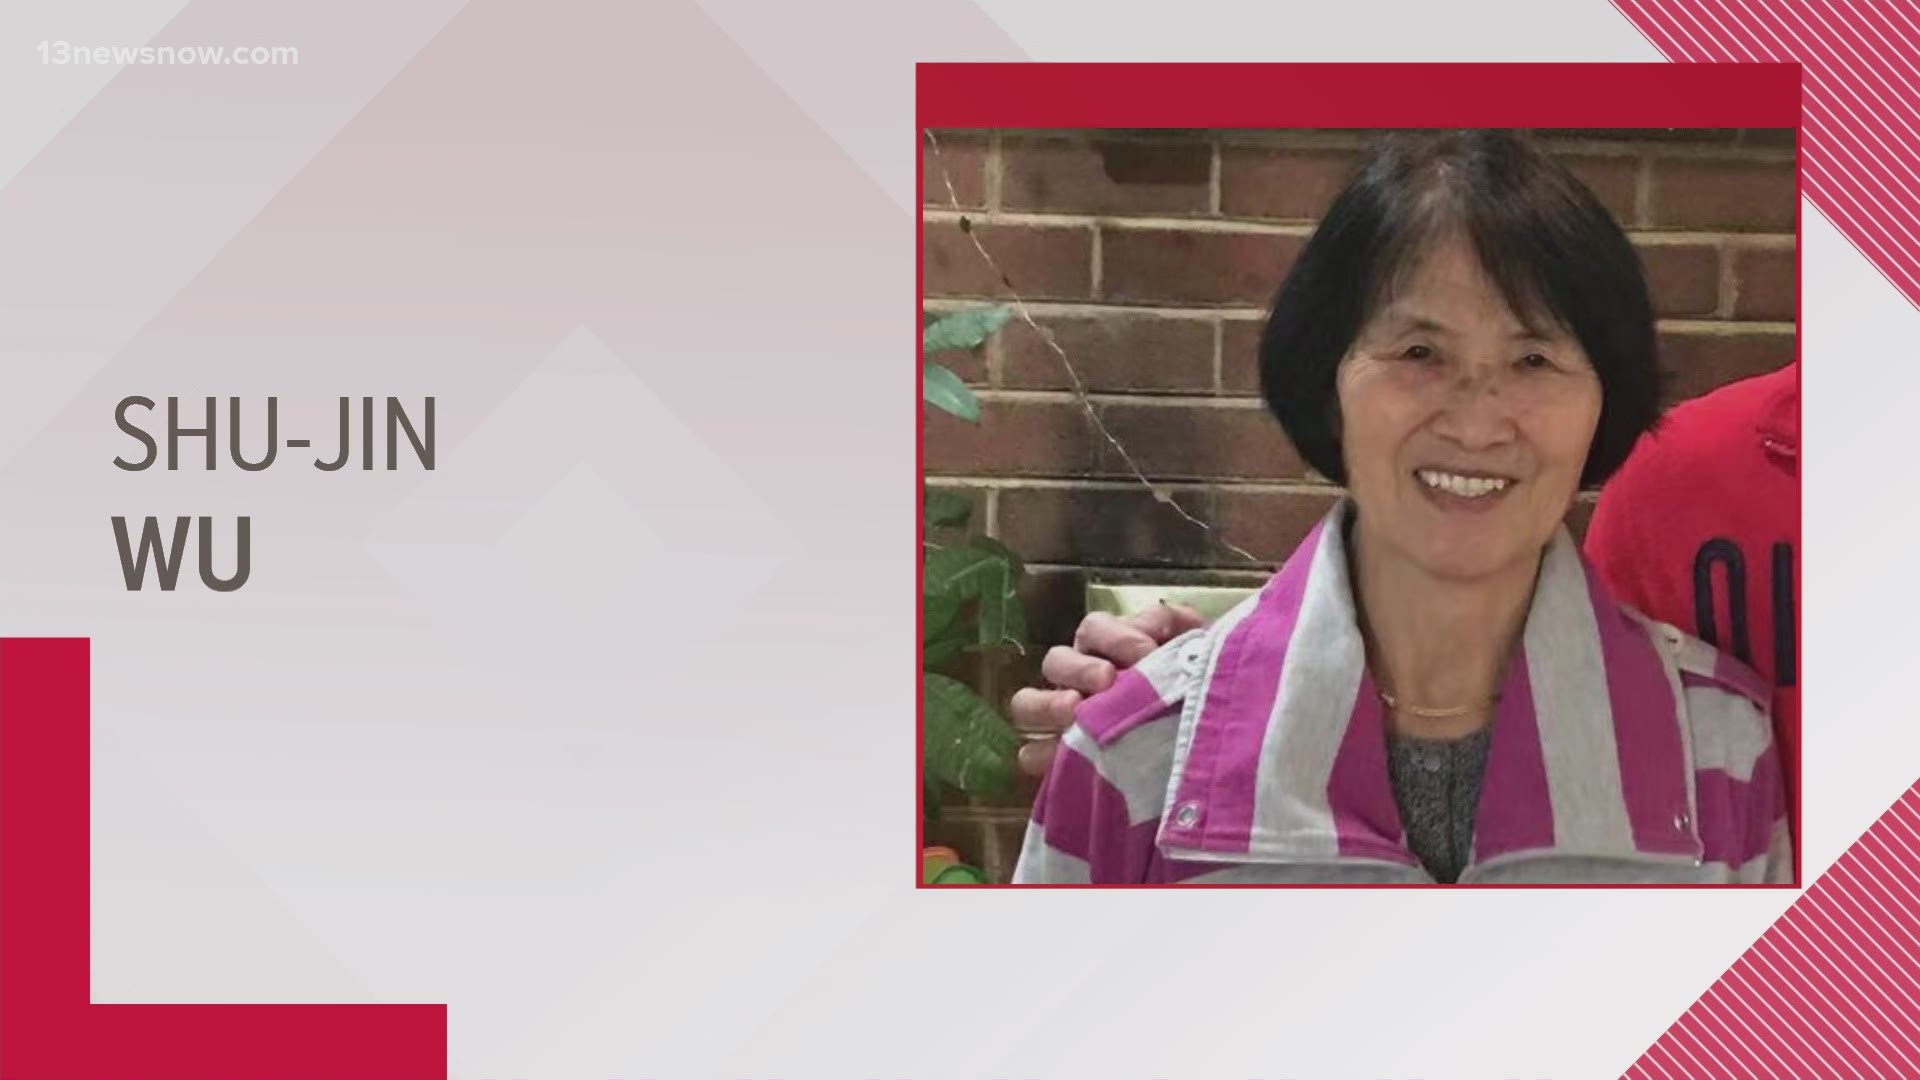 Shu-Jin Wu, 76, last was seen on Feb. 16. Her family told police there is a language barrier that might prevent her from communicating fully with others.